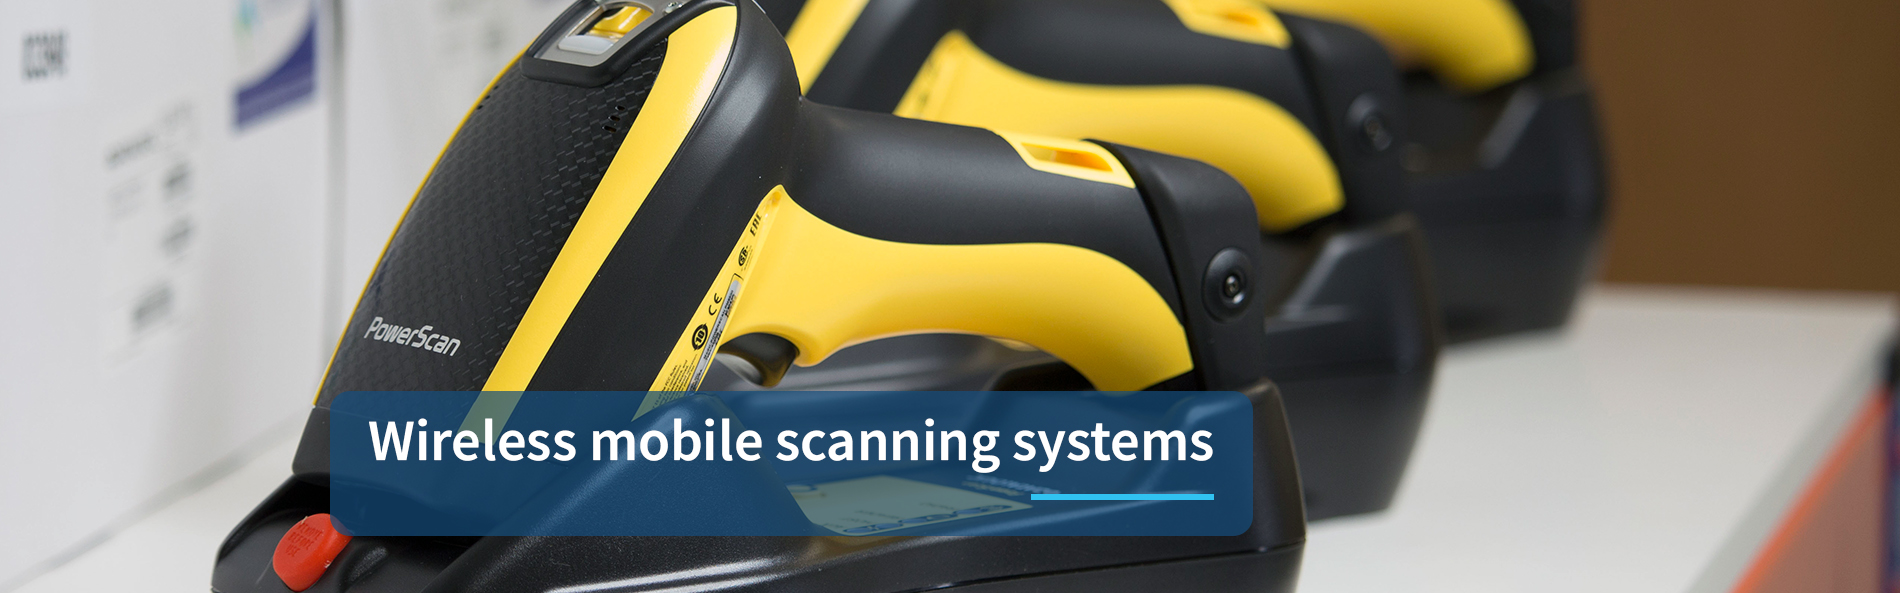 Mobile Wireless scanning systems